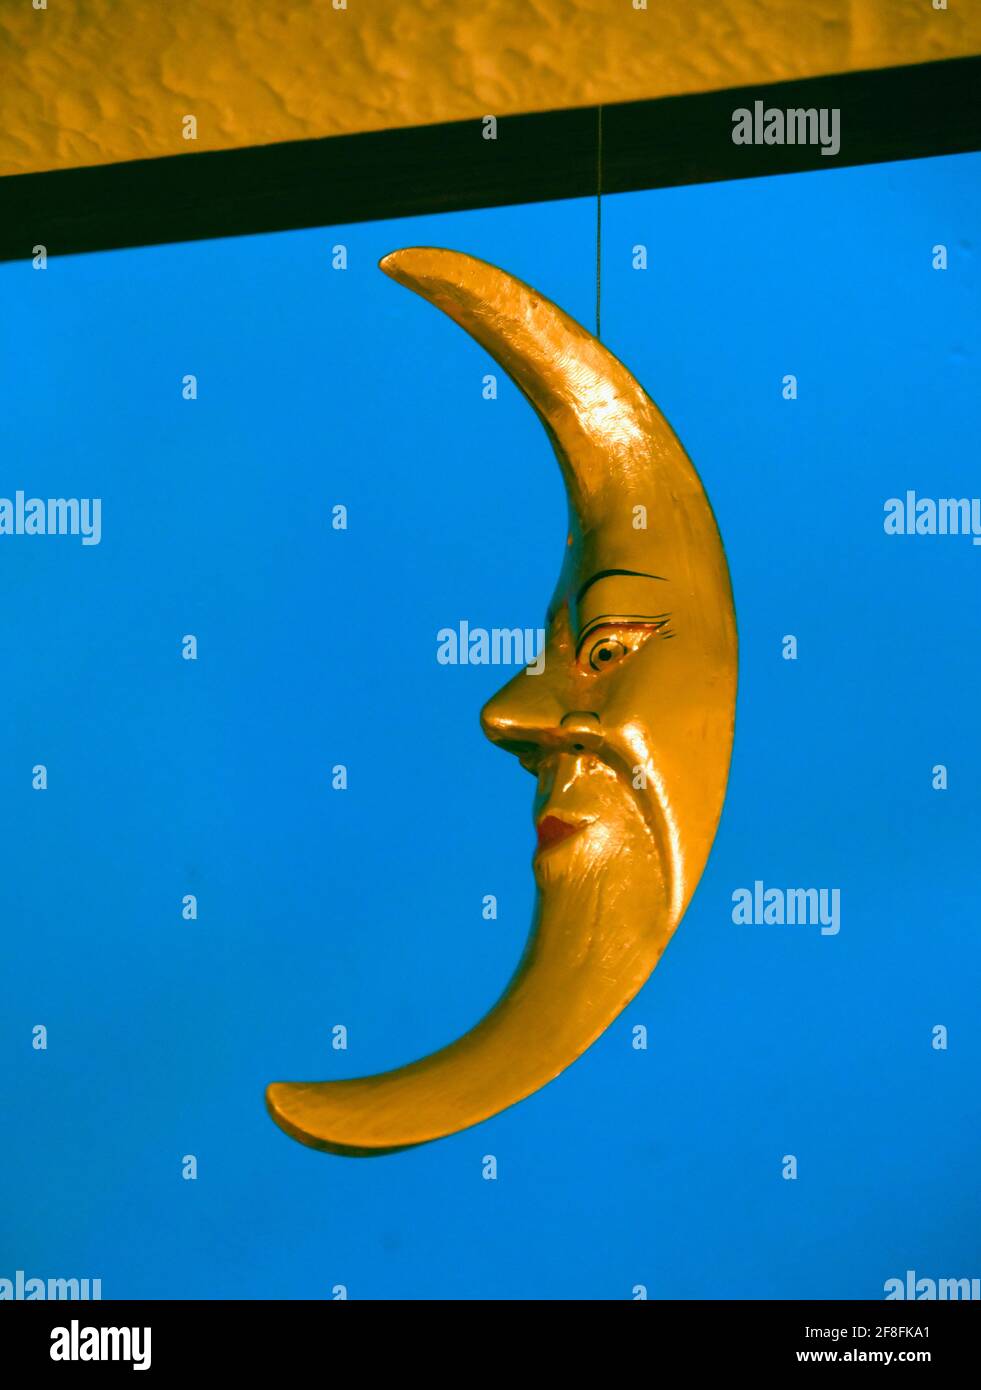 The Man in the Moon. Domestic ornament, gold coloured wooden crecent moon with eyes, nose and mouth. Stock Photo